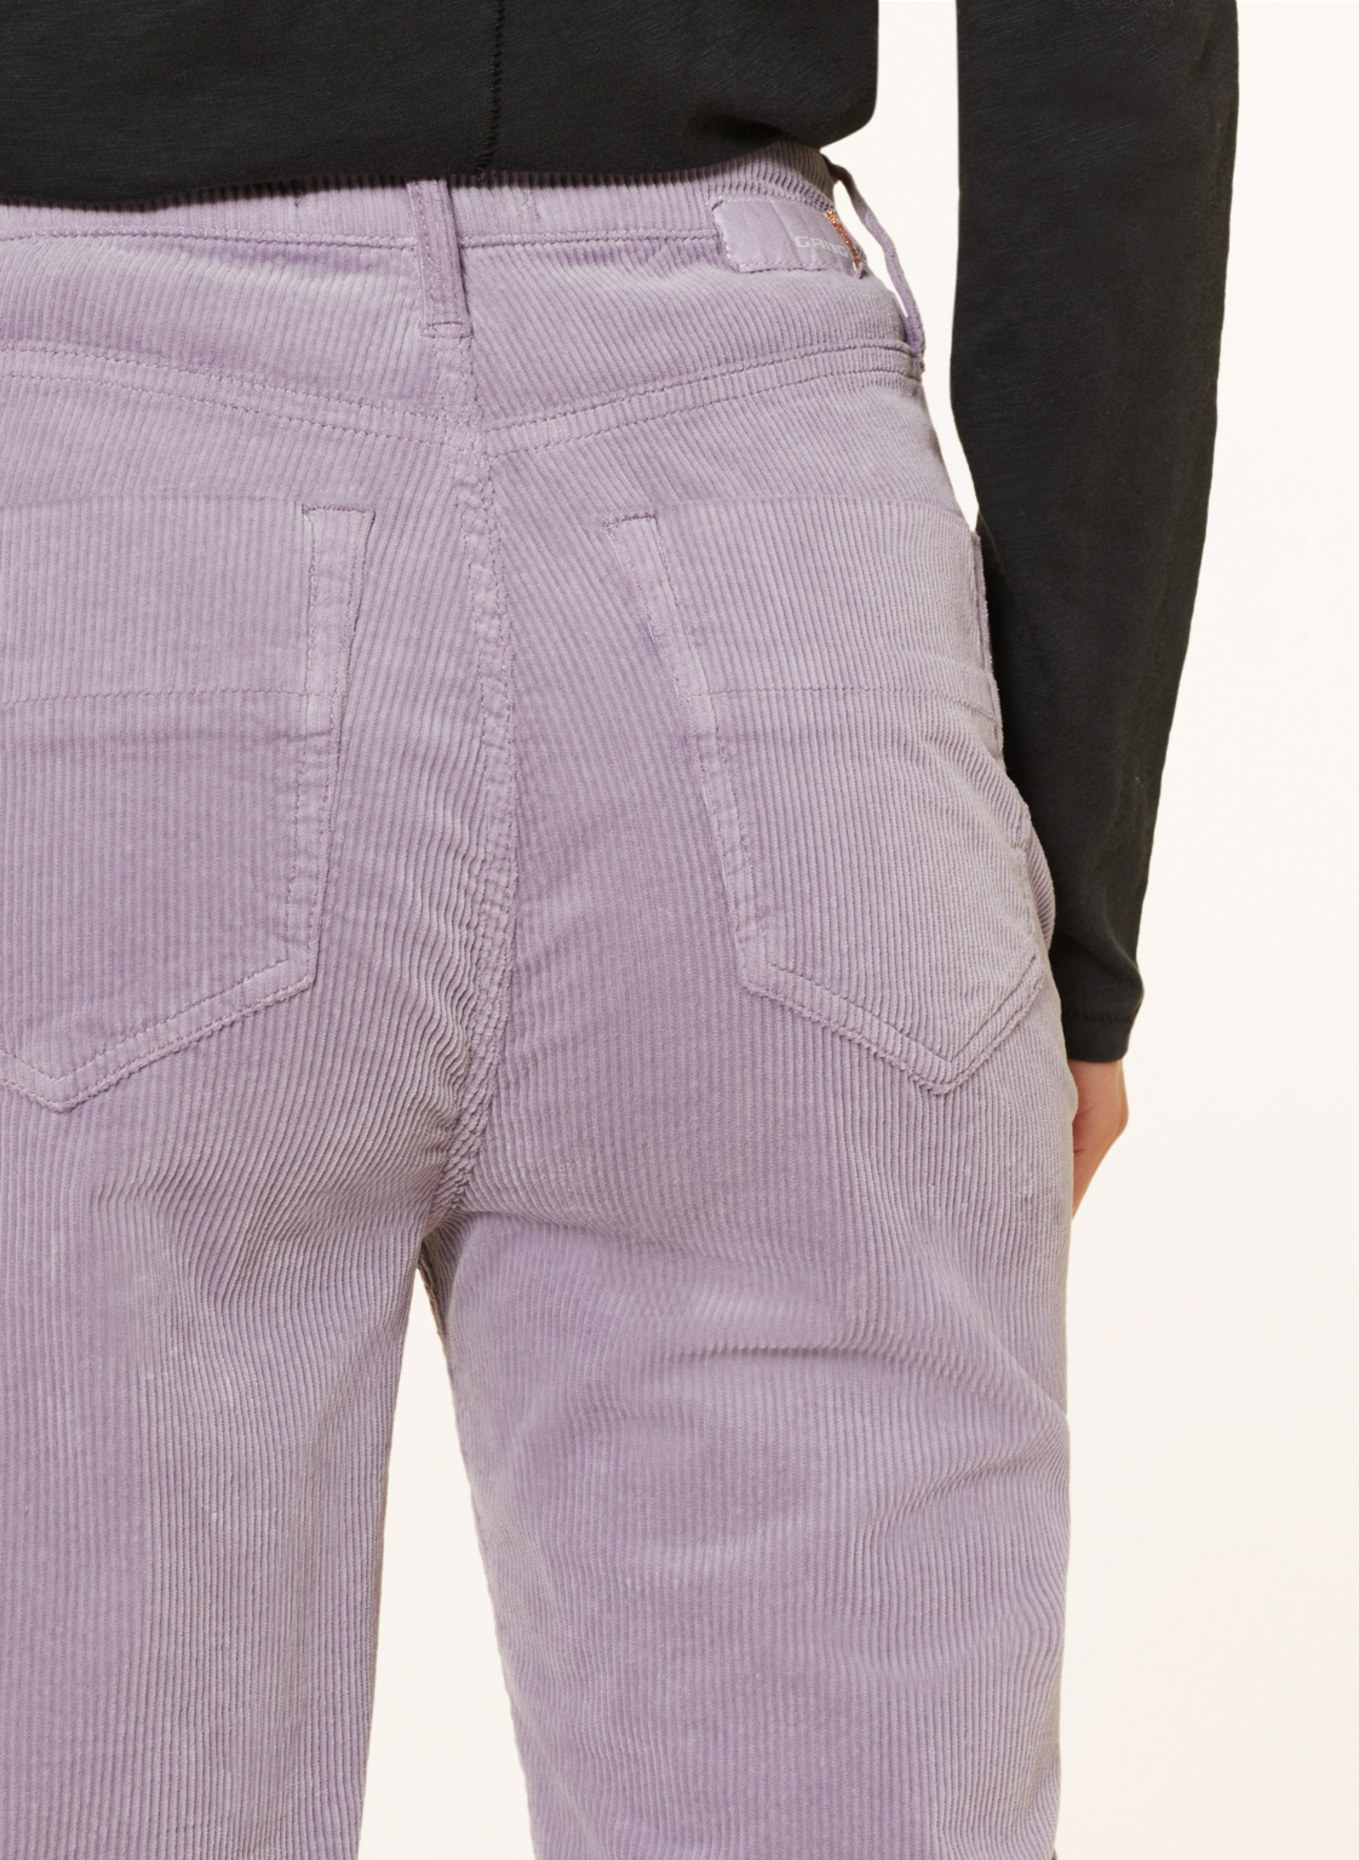 GANG 7/8 trousers SILVIA in corduroy, Color: LIGHT PURPLE (Image 5)